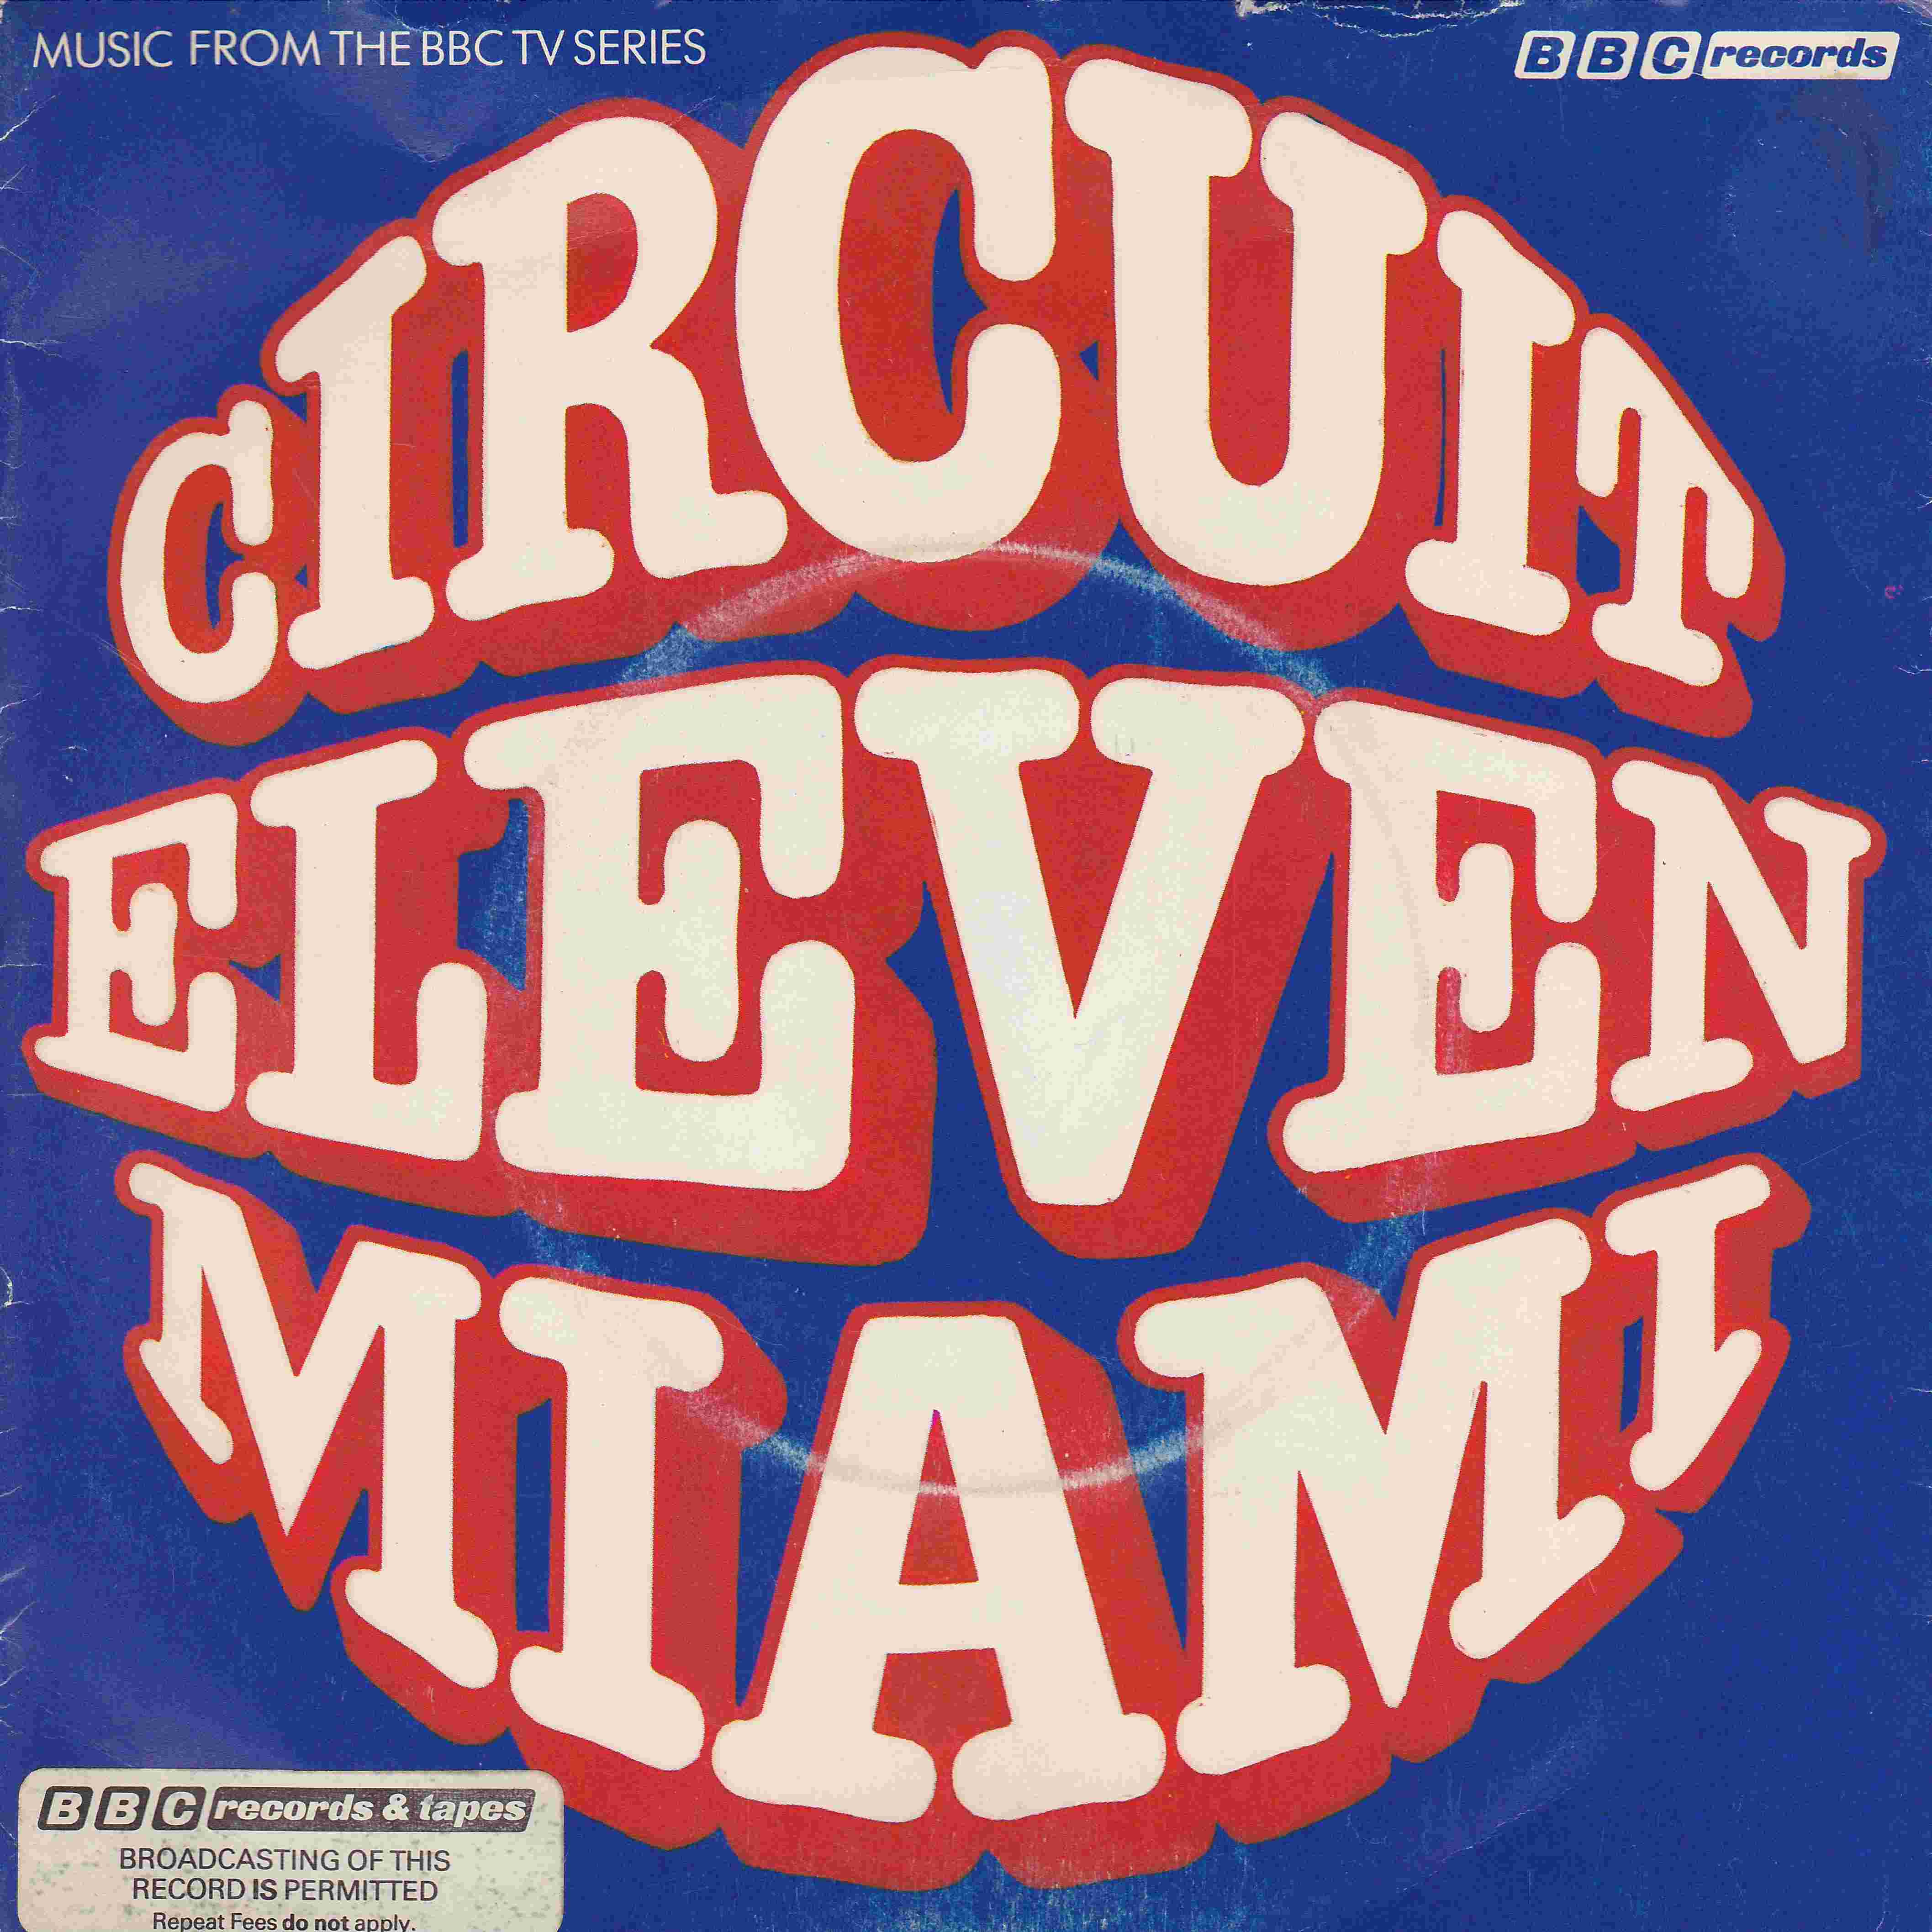 Picture of RESL 70 Circuit eleven - Miami (Promotional record) by artist Richard Denton / Martin Cook from the BBC records and Tapes library